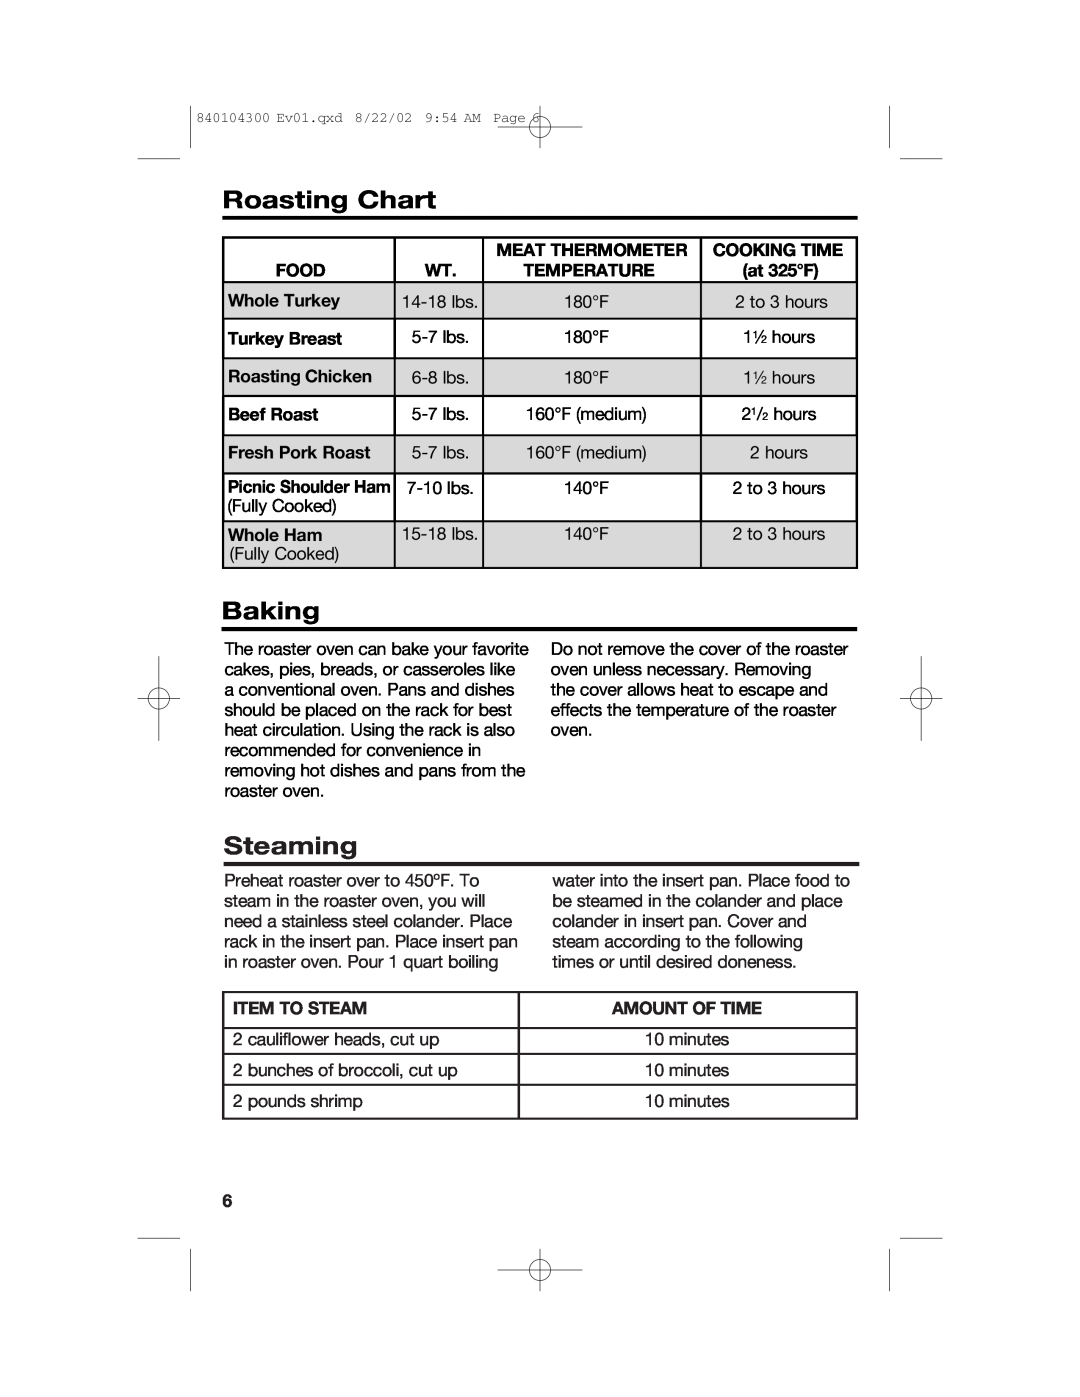 Hamilton Beach 32180C manual Roasting Chart, Baking, Steaming, Meat Thermometer, Cooking Time, Food, Temperature, at 325F 